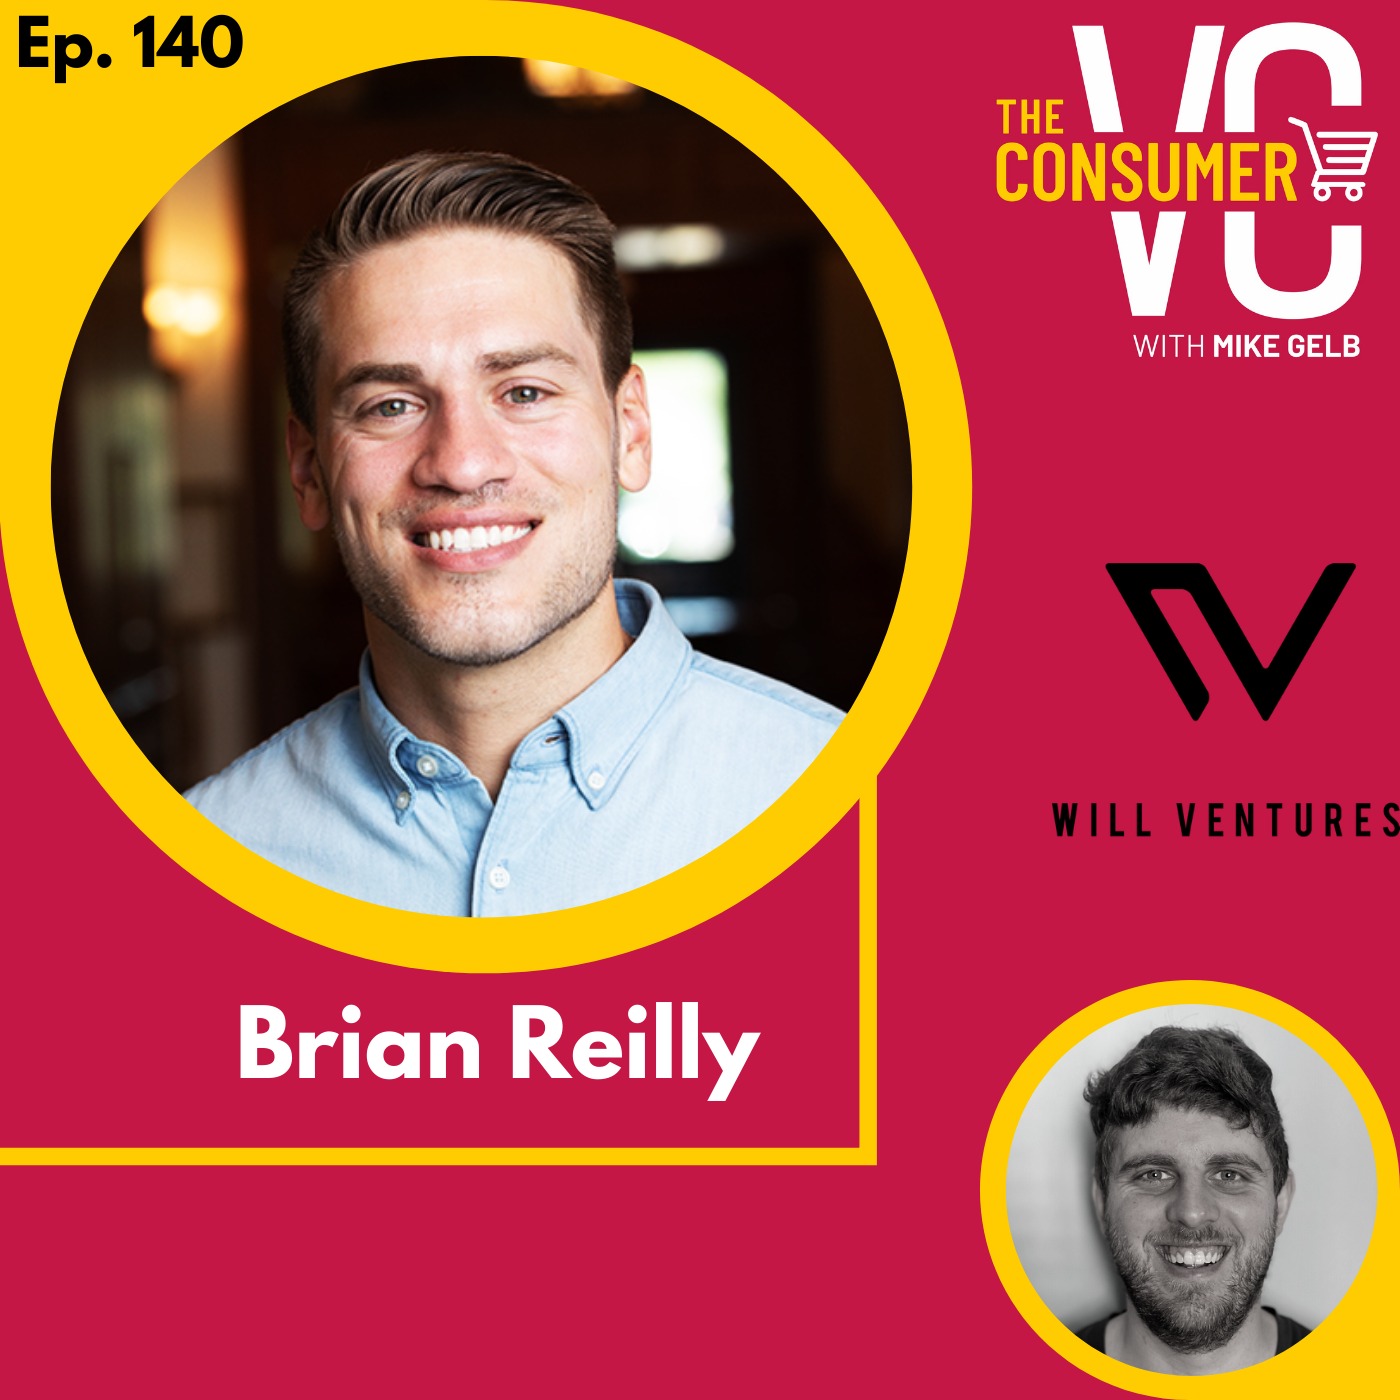 Brian Reilly (Will Ventures) - The opportunities investing in sports, media and telehealth